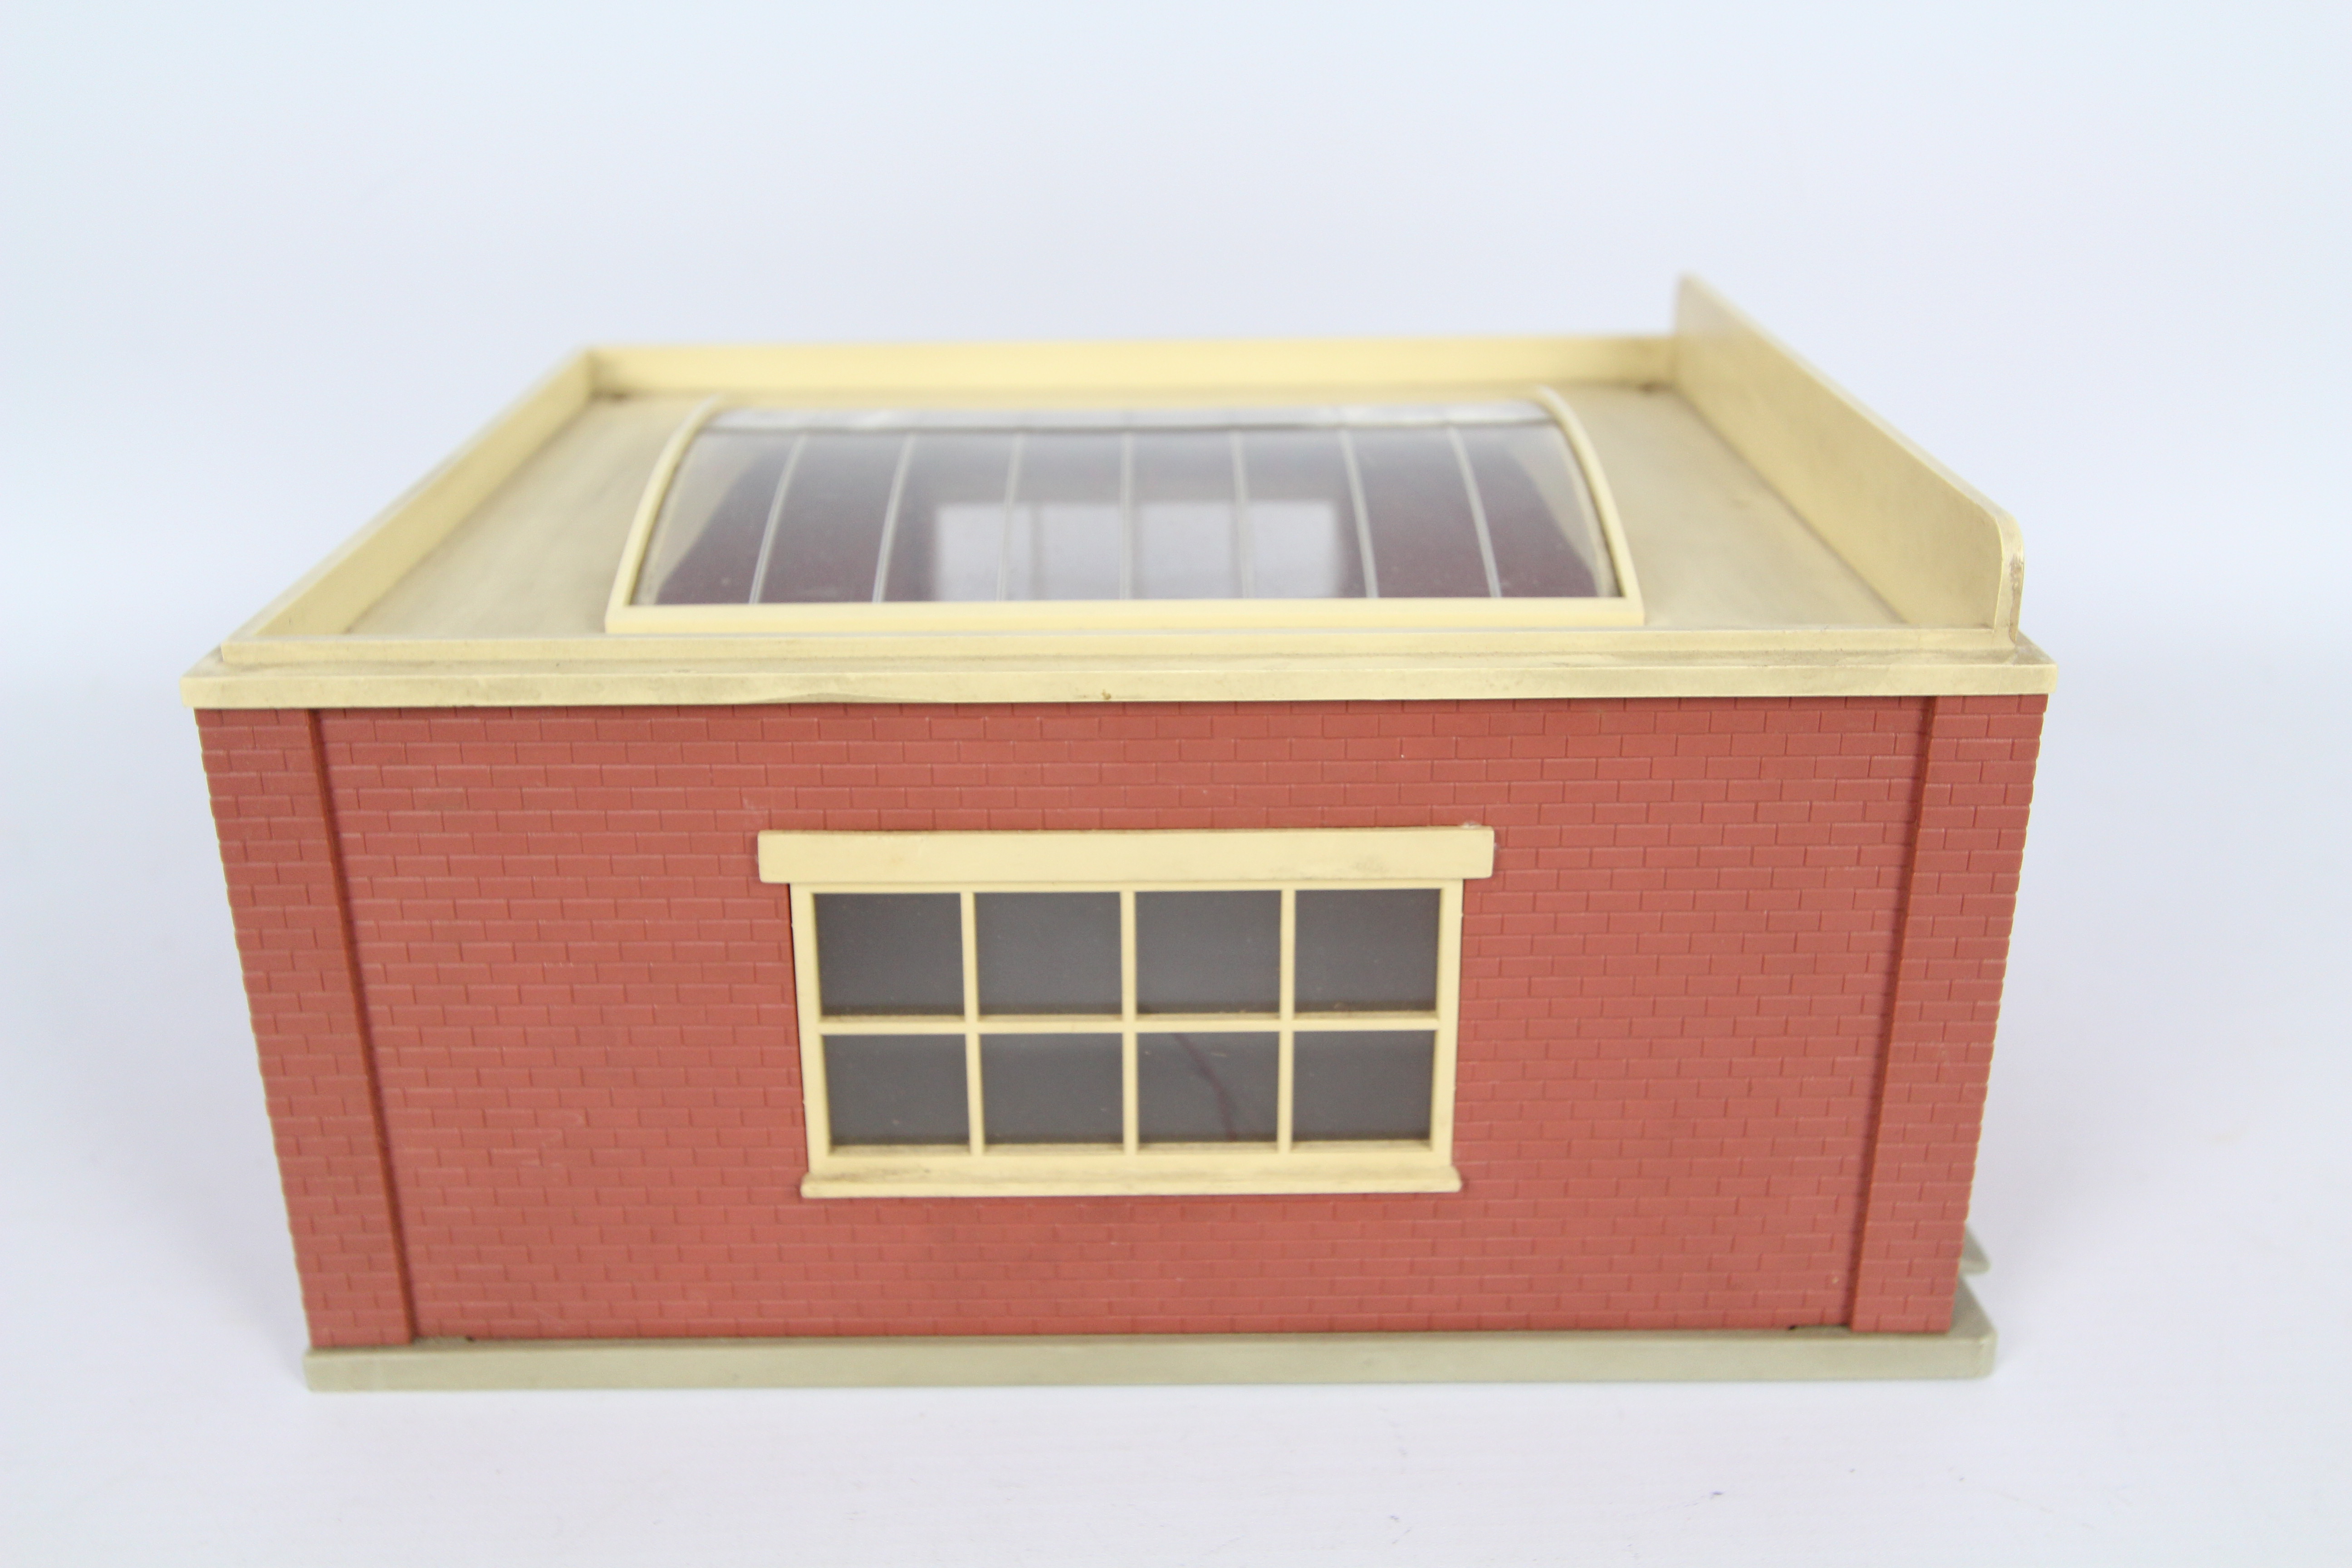 Dinky Toys - An unboxed Dinky Toys #954 Fire Station. - Image 4 of 5